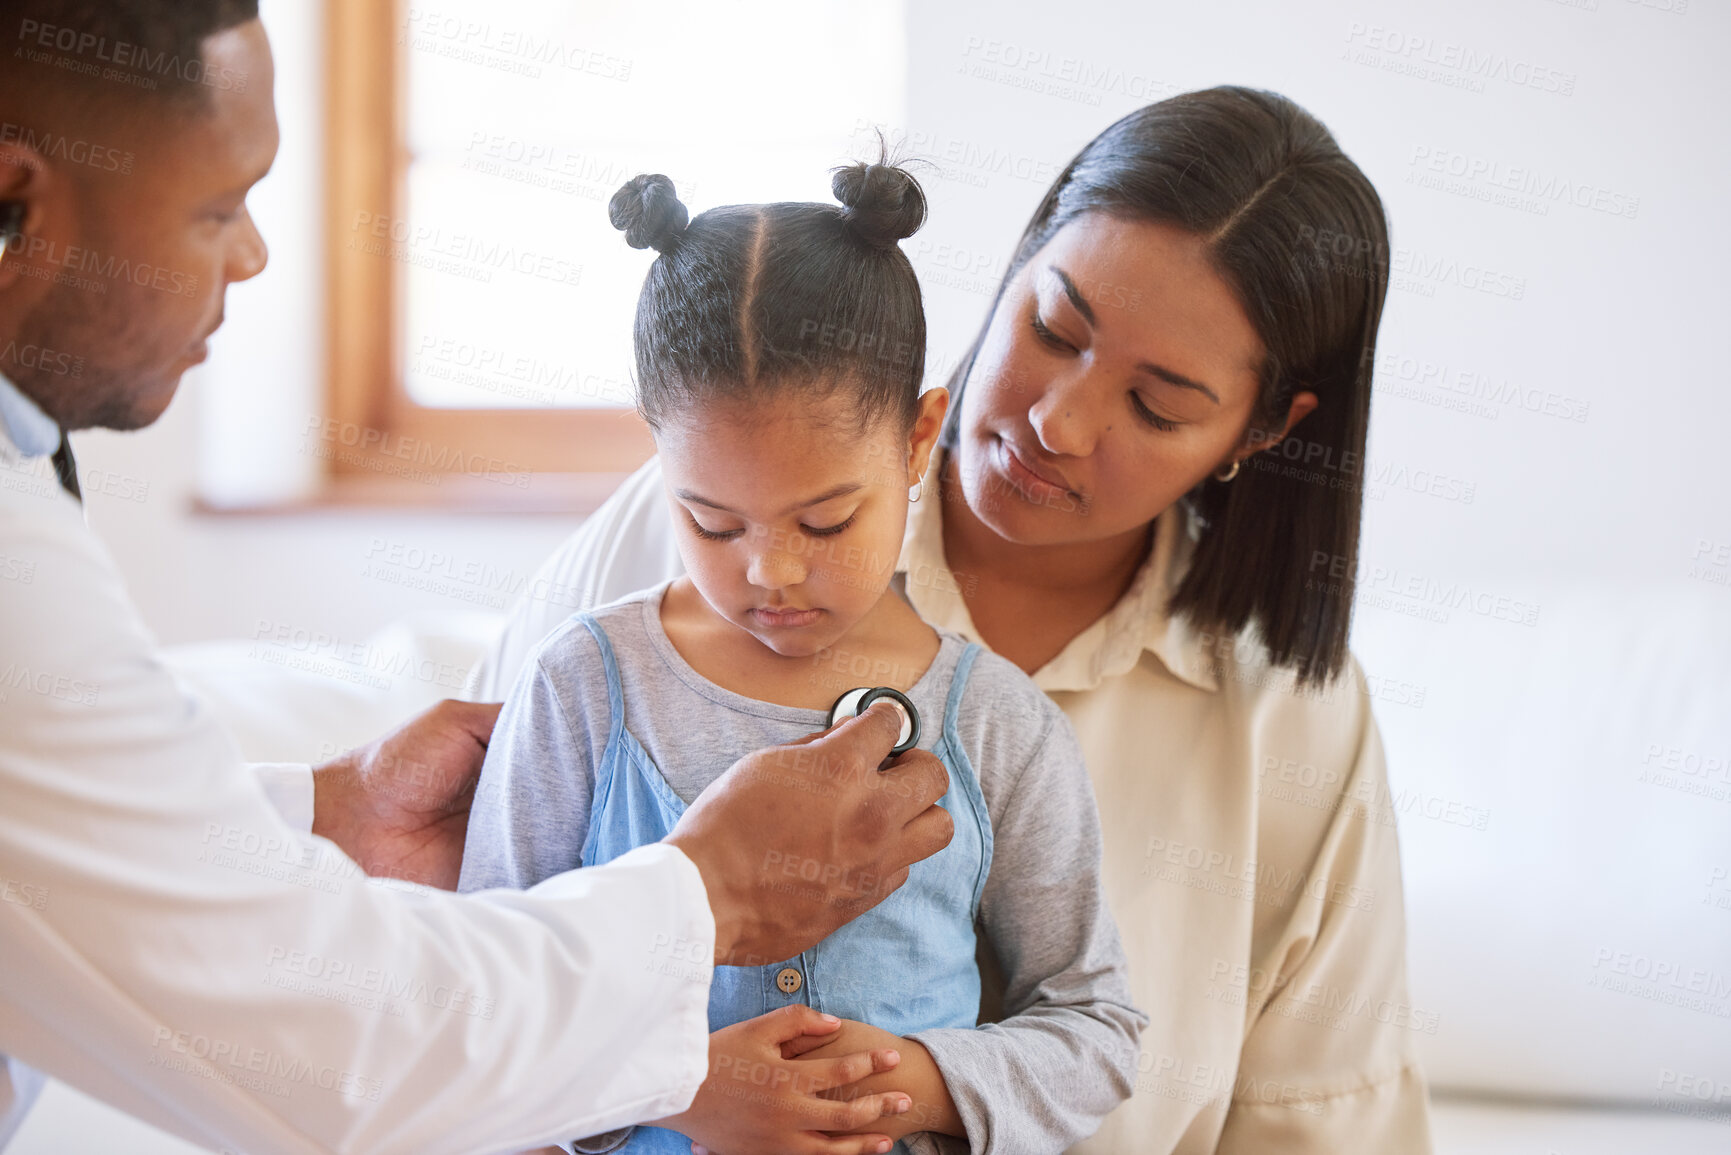 Buy stock photo Sick child at doctor's office with her mother. Little girl sitting with mother while male paediatrician listen to chest heartbeat. Male doctor examining child with stethoscope. Mom holding kid during doctor visit